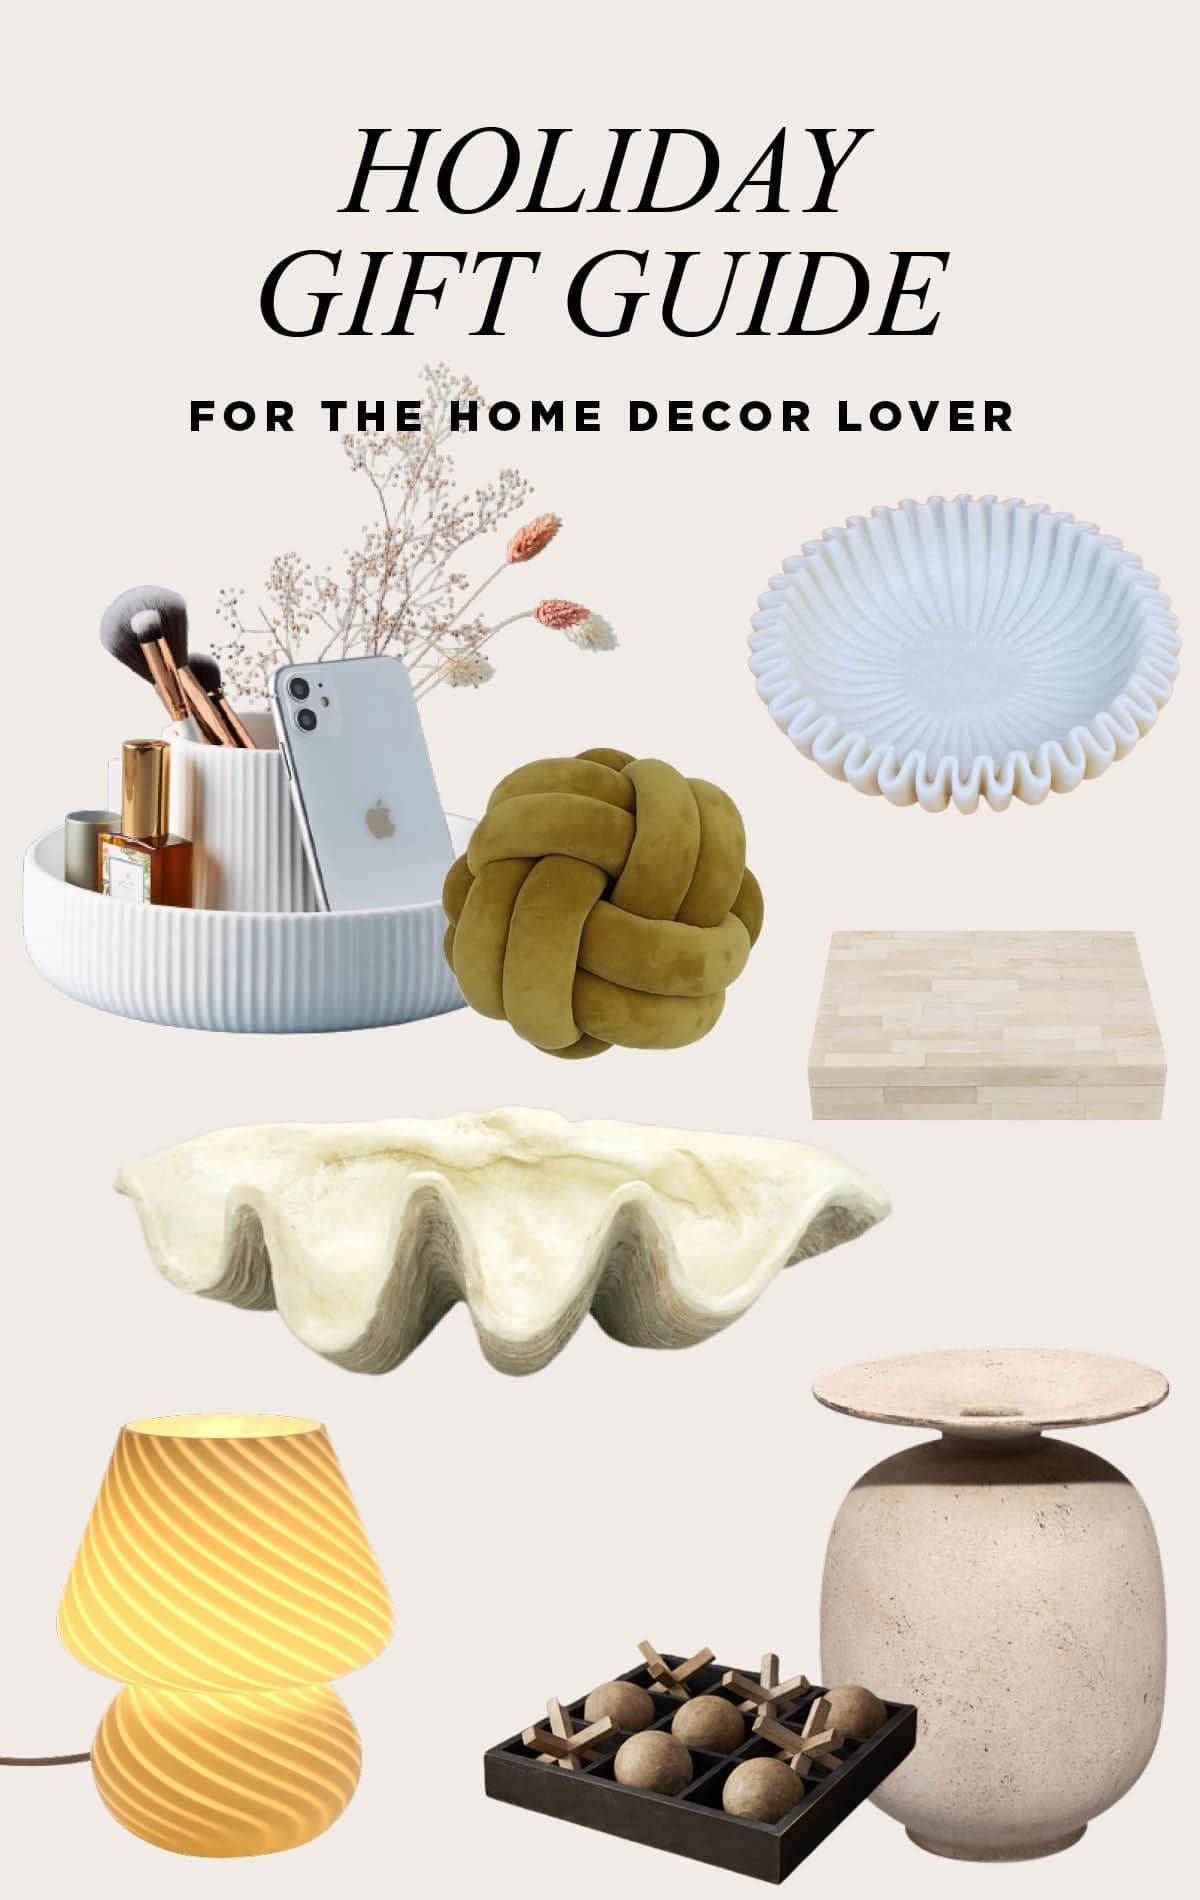 Gift giving ideas for the home decor lover